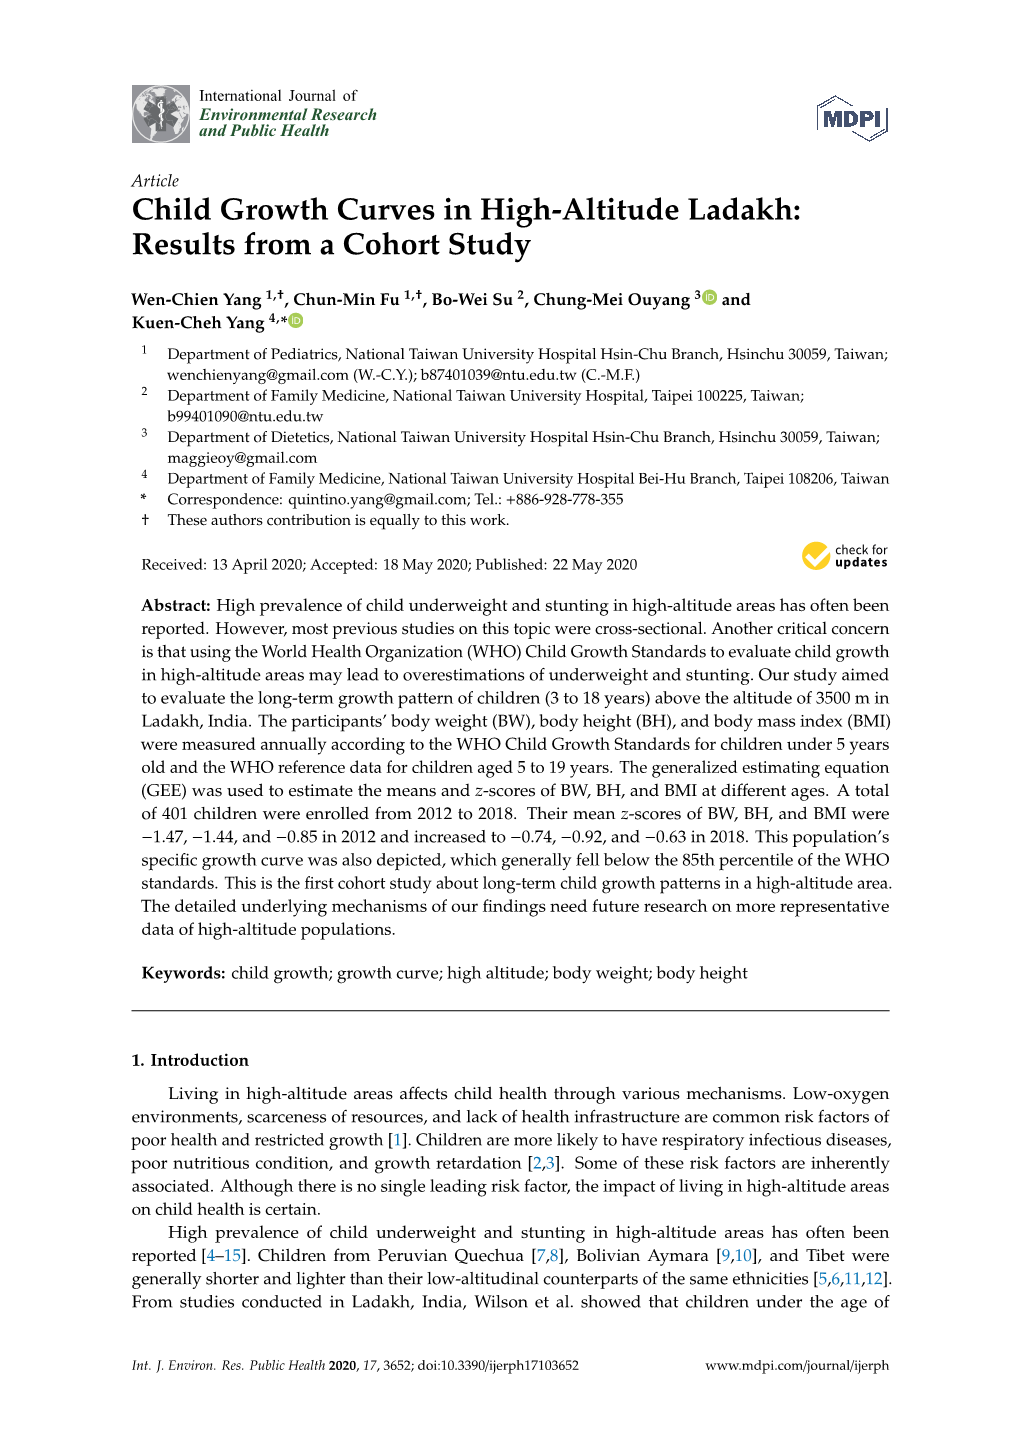 Child Growth Curves in High-Altitude Ladakh: Results from a Cohort Study